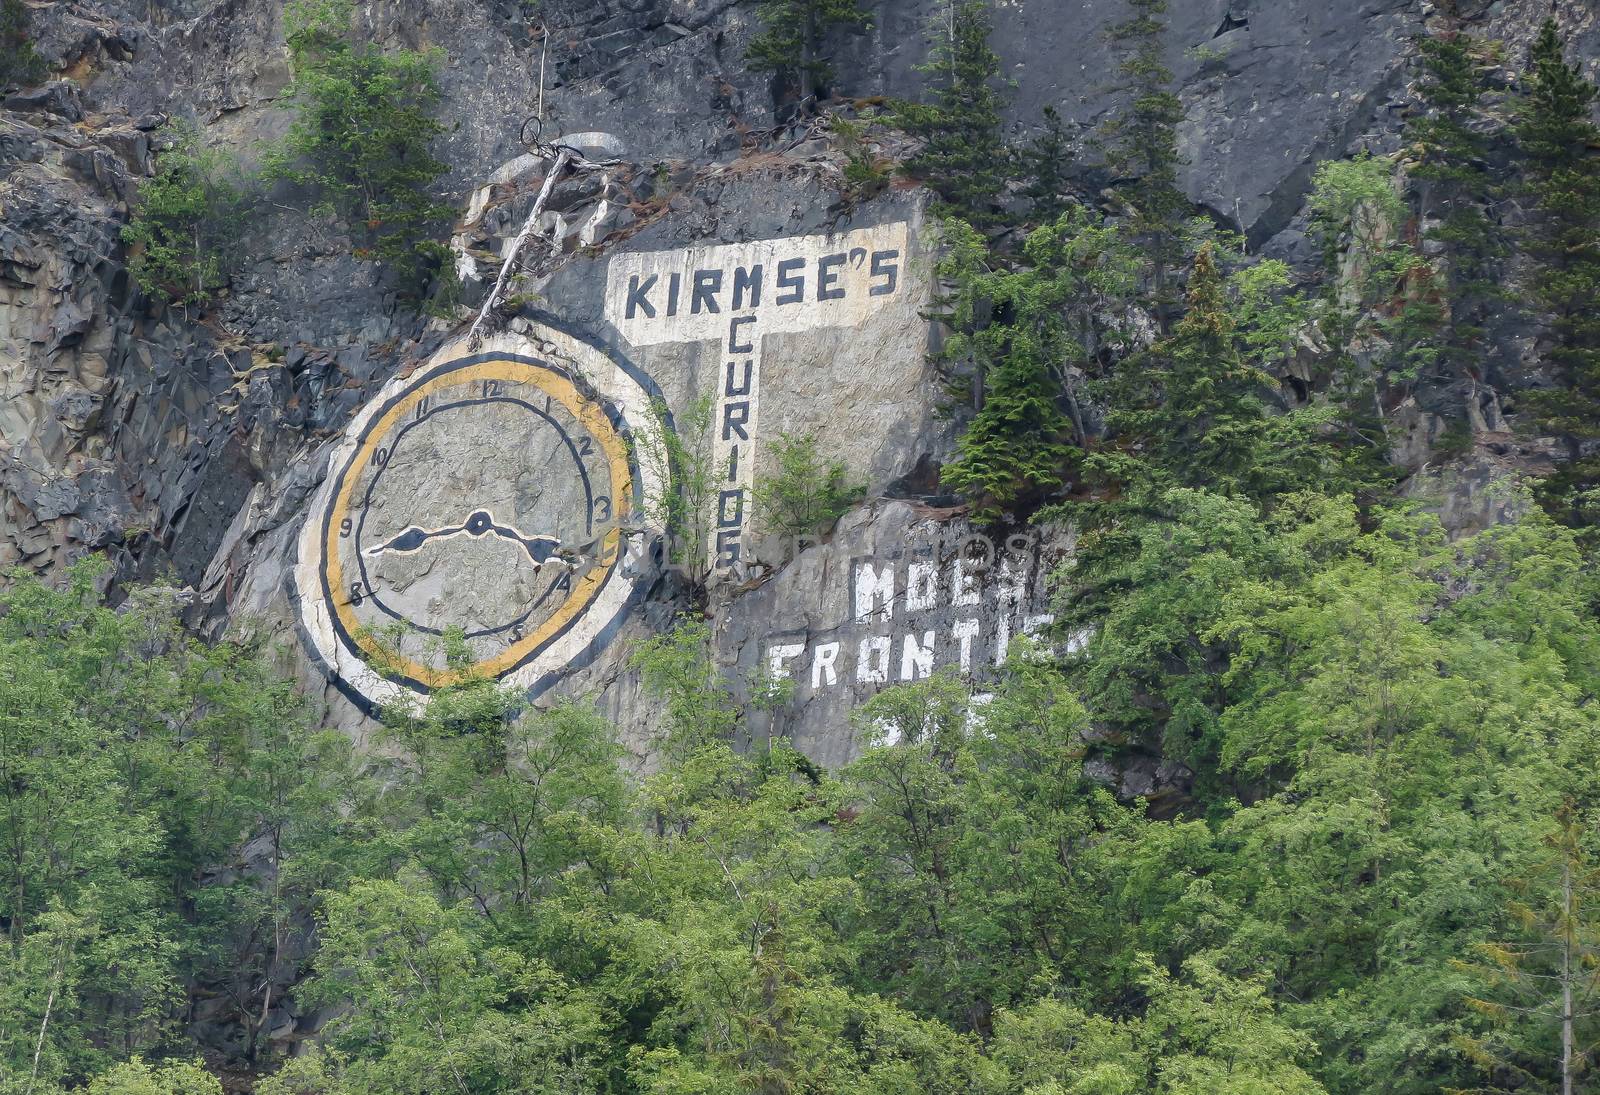 Skagway, Alaska, USA-June 18, 2012: Rock Clock is a large painting on the cliff of a hillside in Skagway. This was first painted during the gold rush era in Alaska.